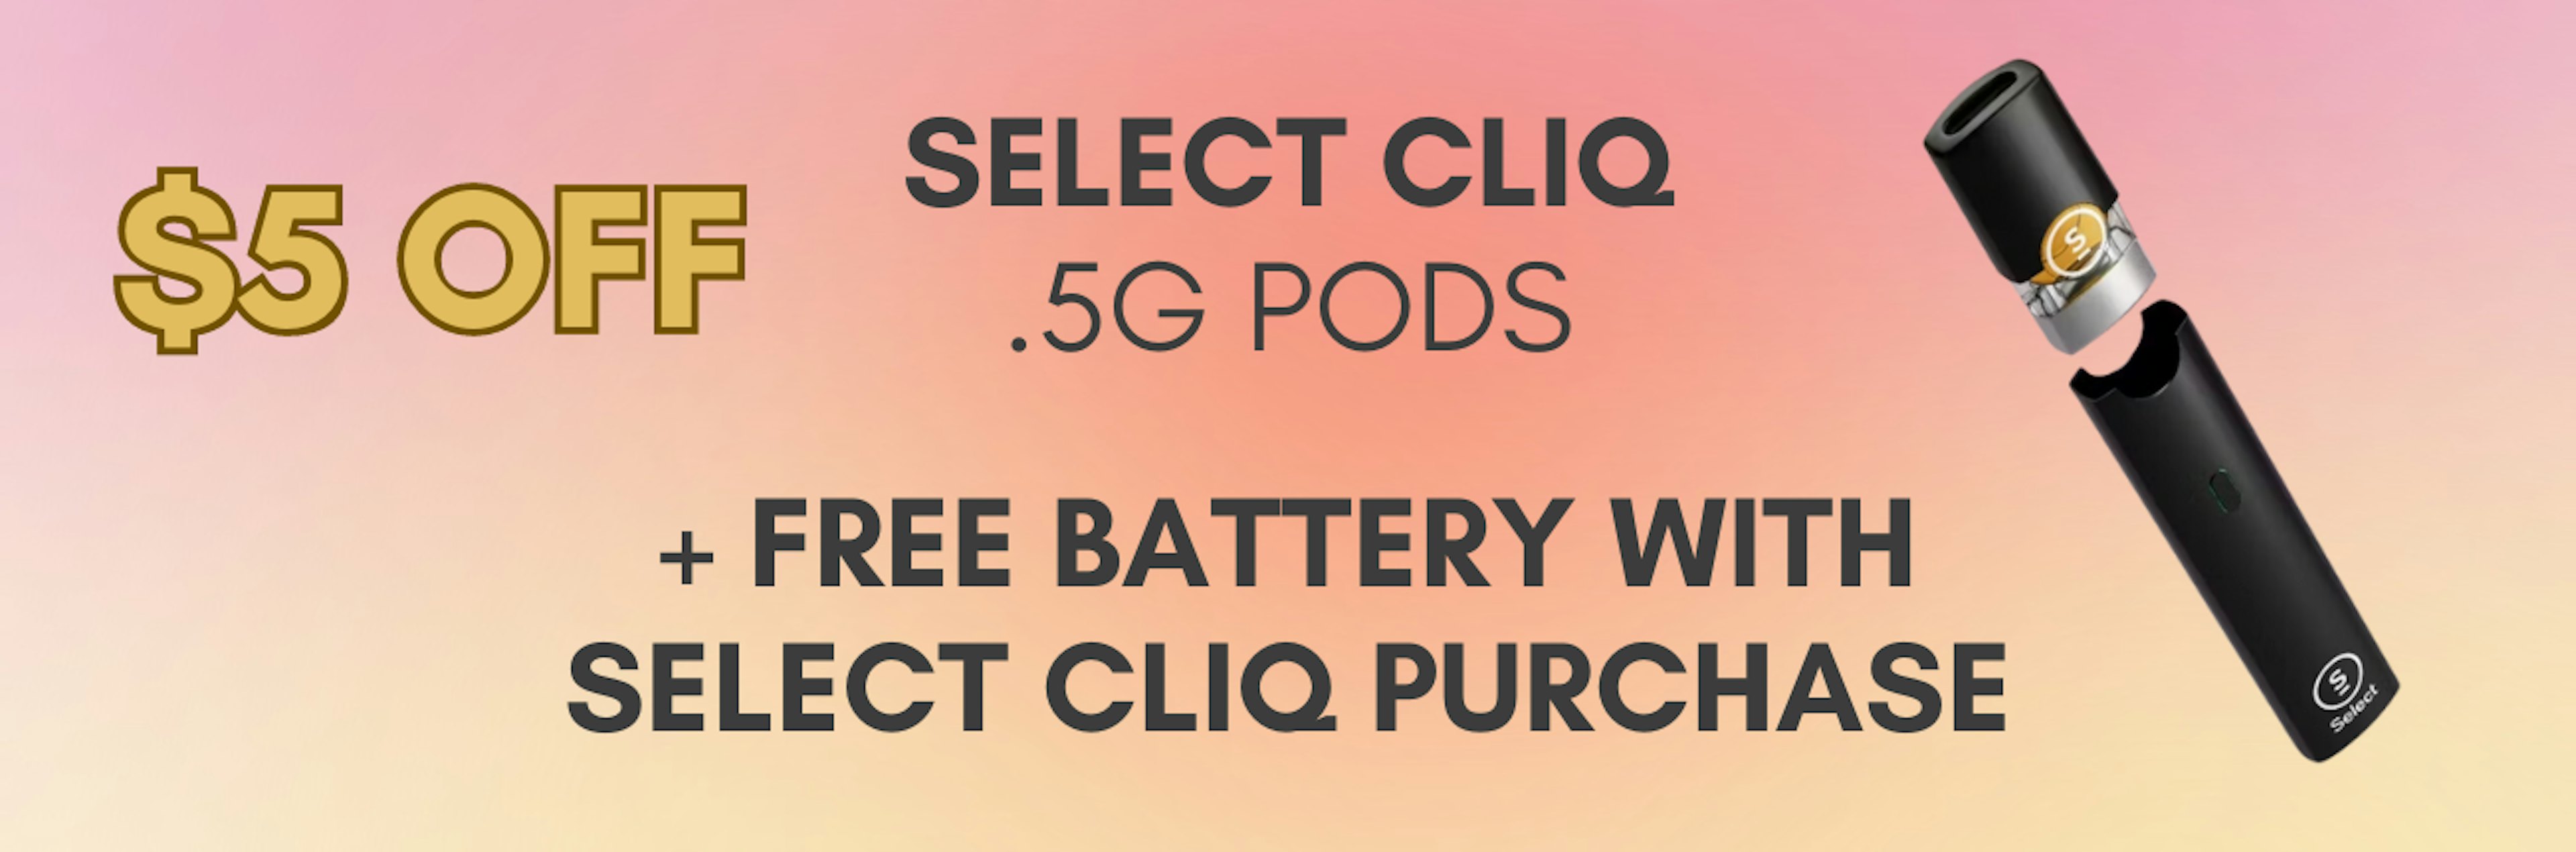 $5 off select cliq and free battery